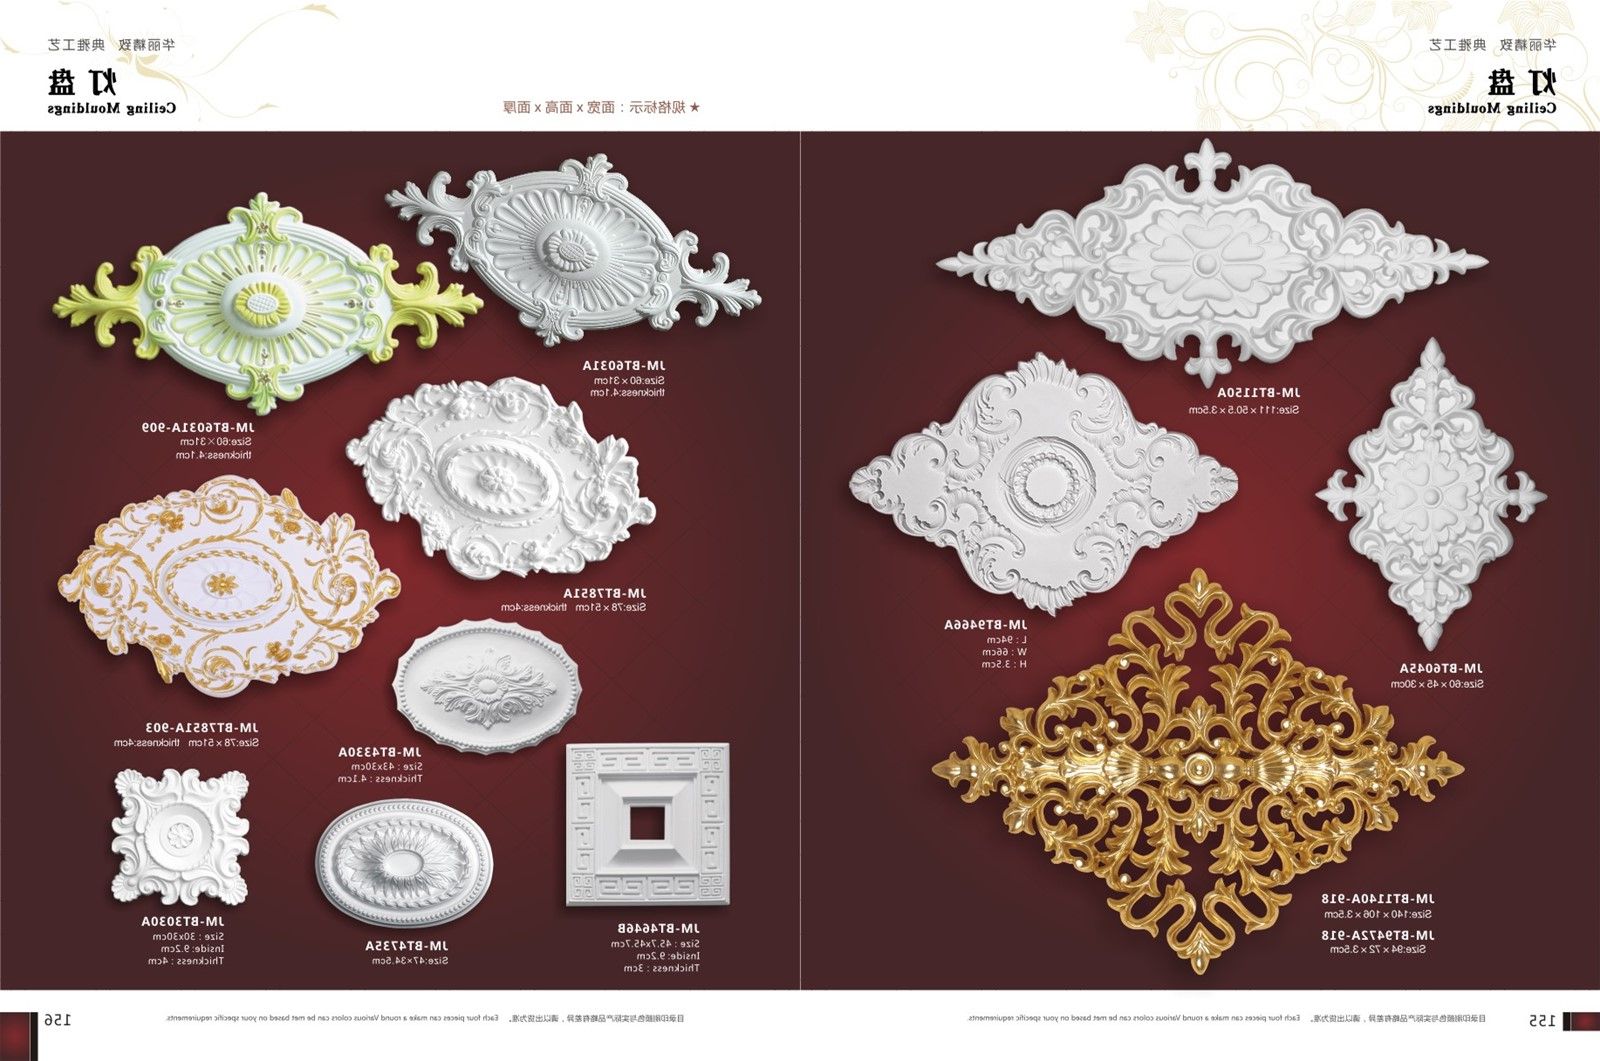 European Medallion Wall Decor For 2019 Polyurethane Pu Ceiling Medallions Wall Decoration From China (View 18 of 20)